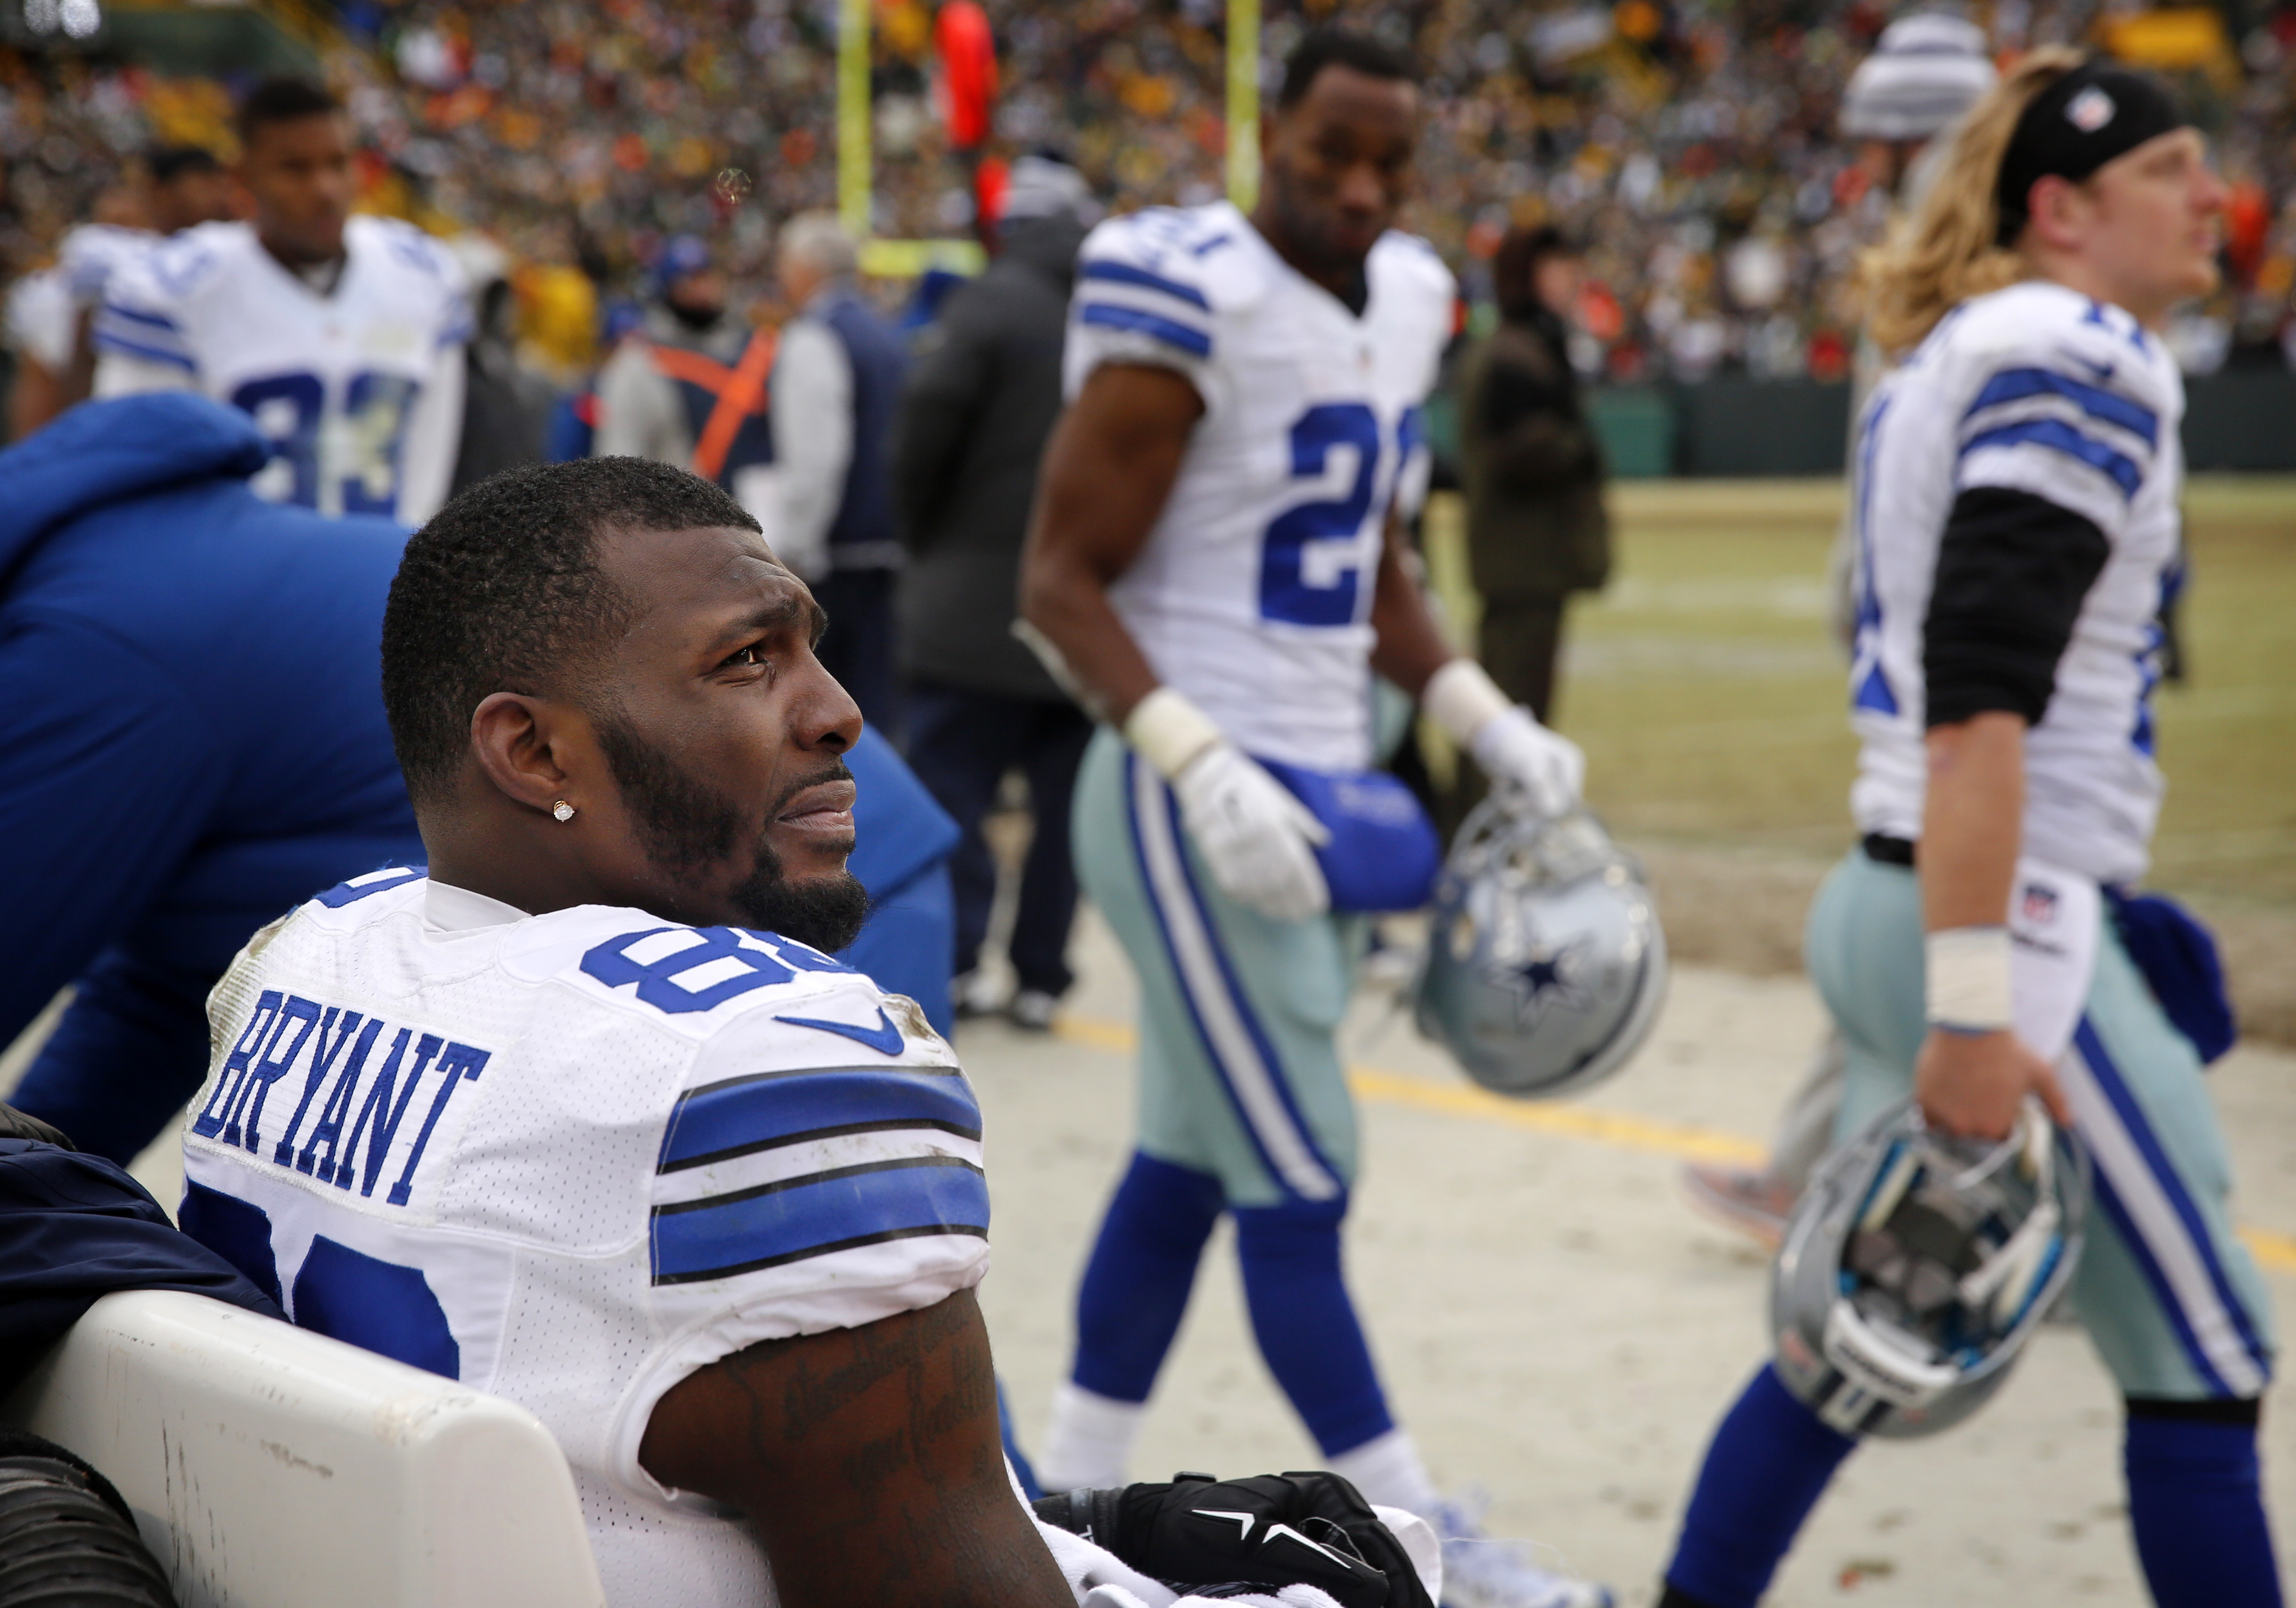 Dallas Cowboys release Dez Bryant: A timeline of the wide